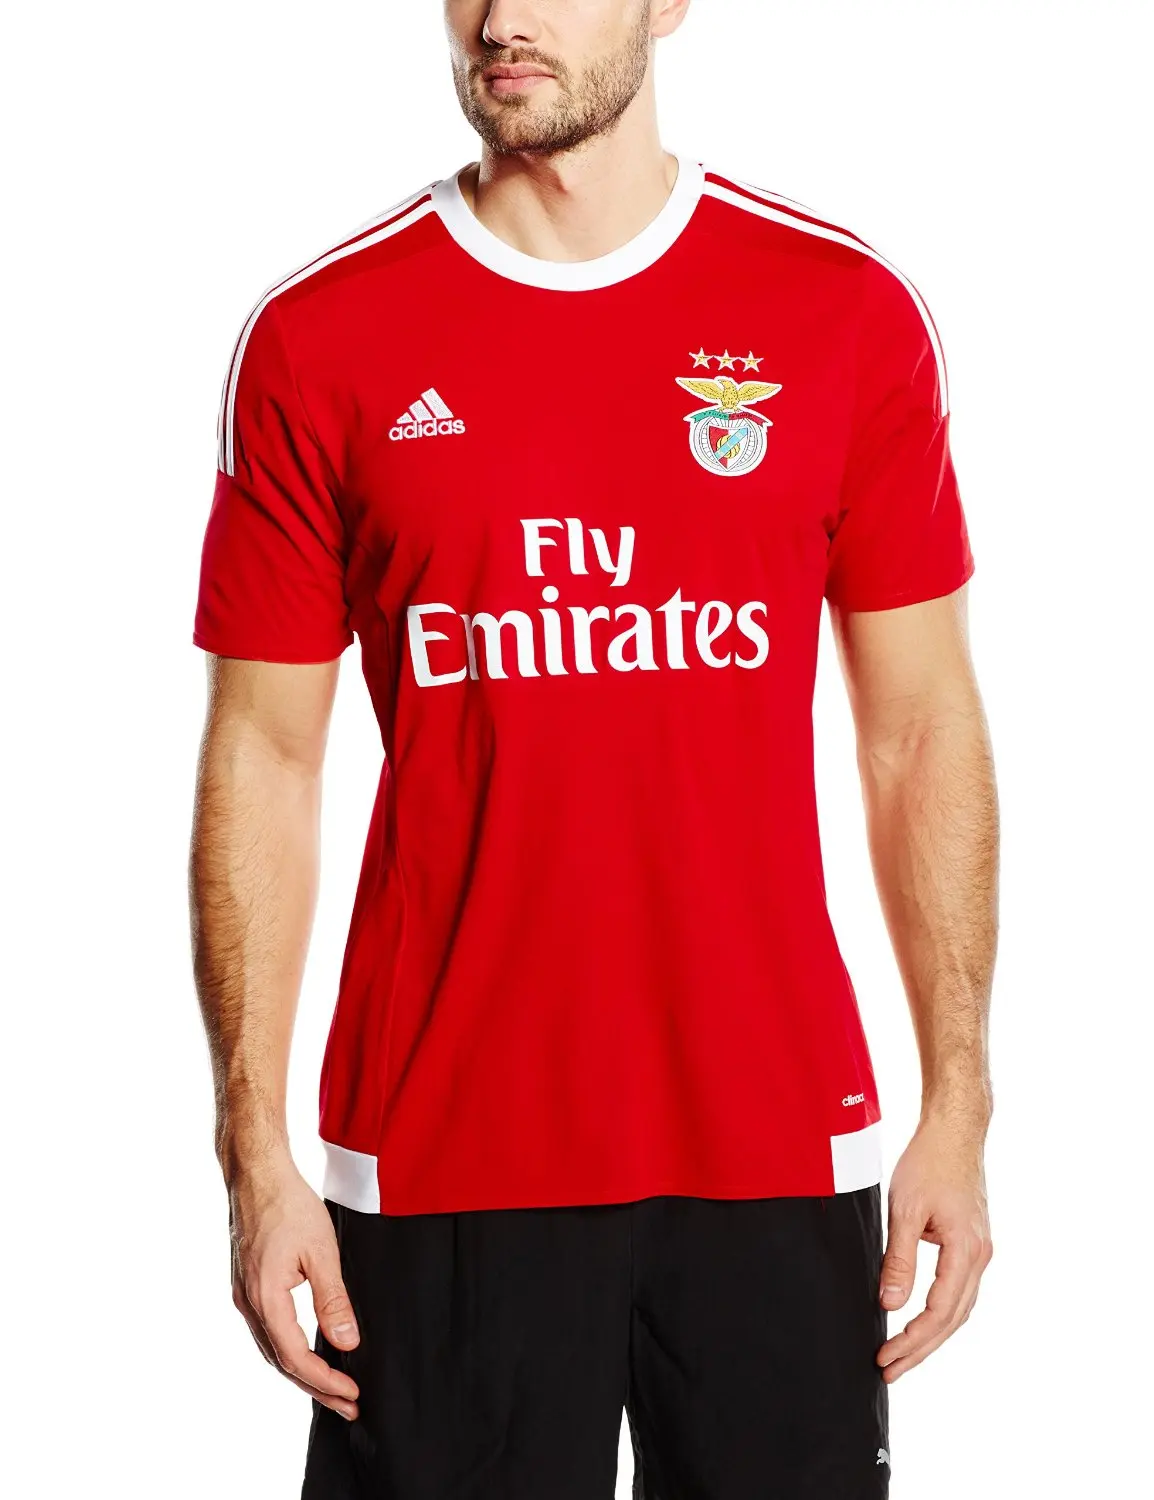 Cheap Jersey Benfica, find Jersey Benfica deals on line at Alibaba.com